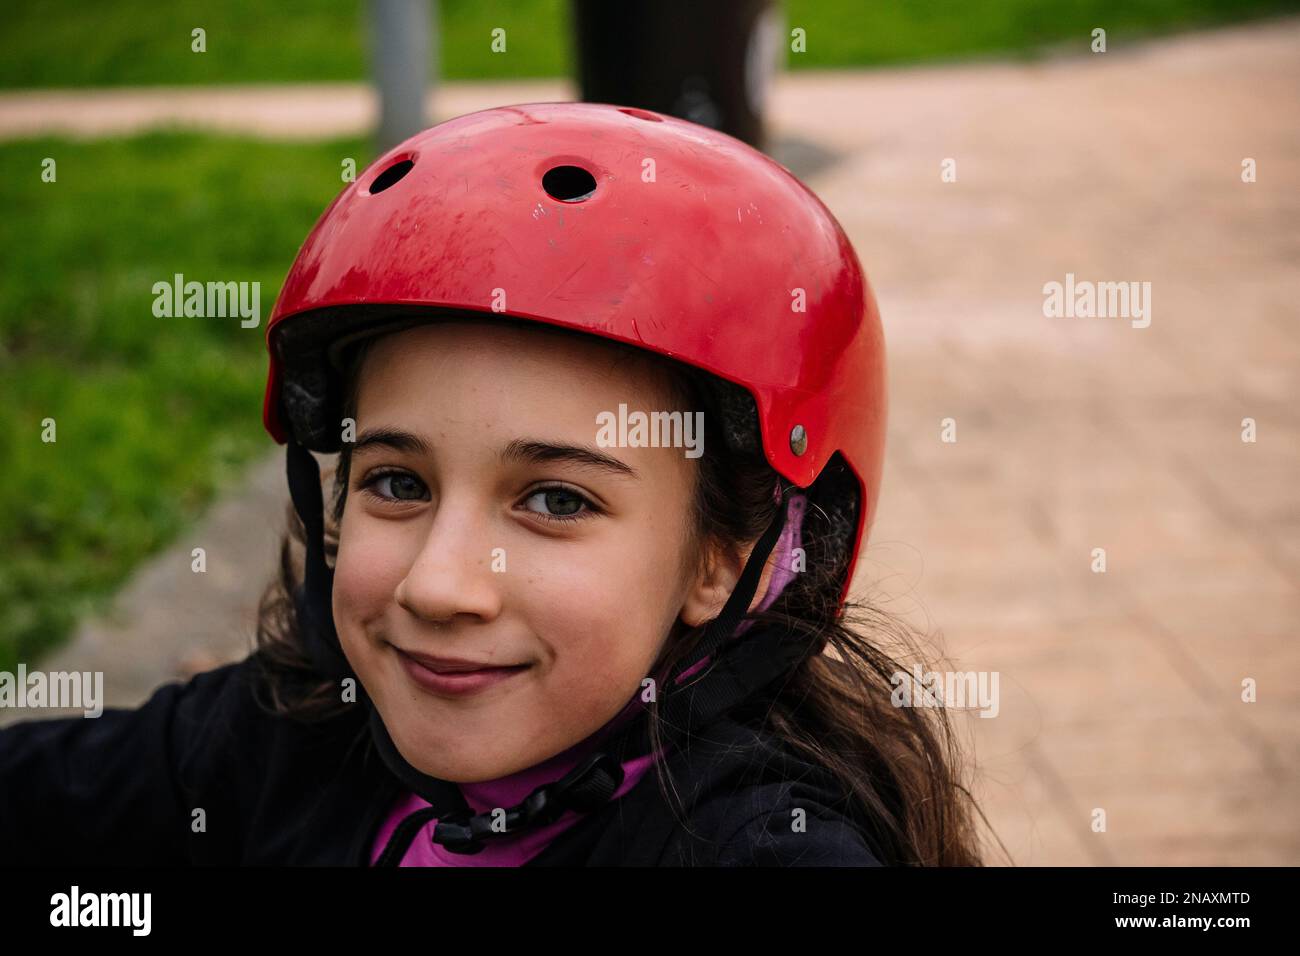 closeup of a little girl with the red helmet for her scooter in a skatepark. Stock Photo